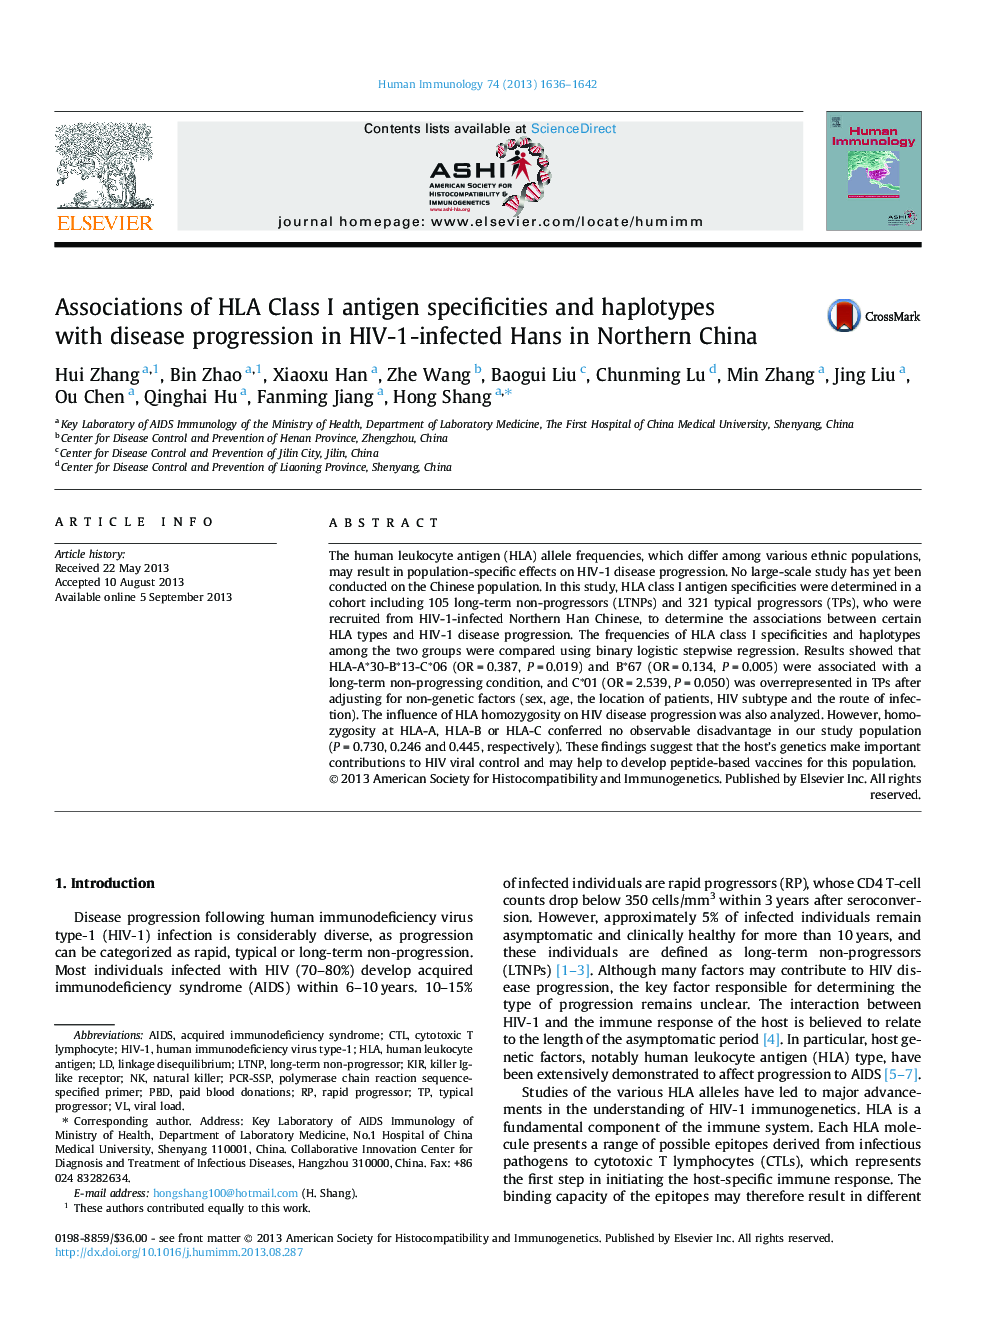 Associations of HLA Class I antigen specificities and haplotypes with disease progression in HIV-1-infected Hans in Northern China